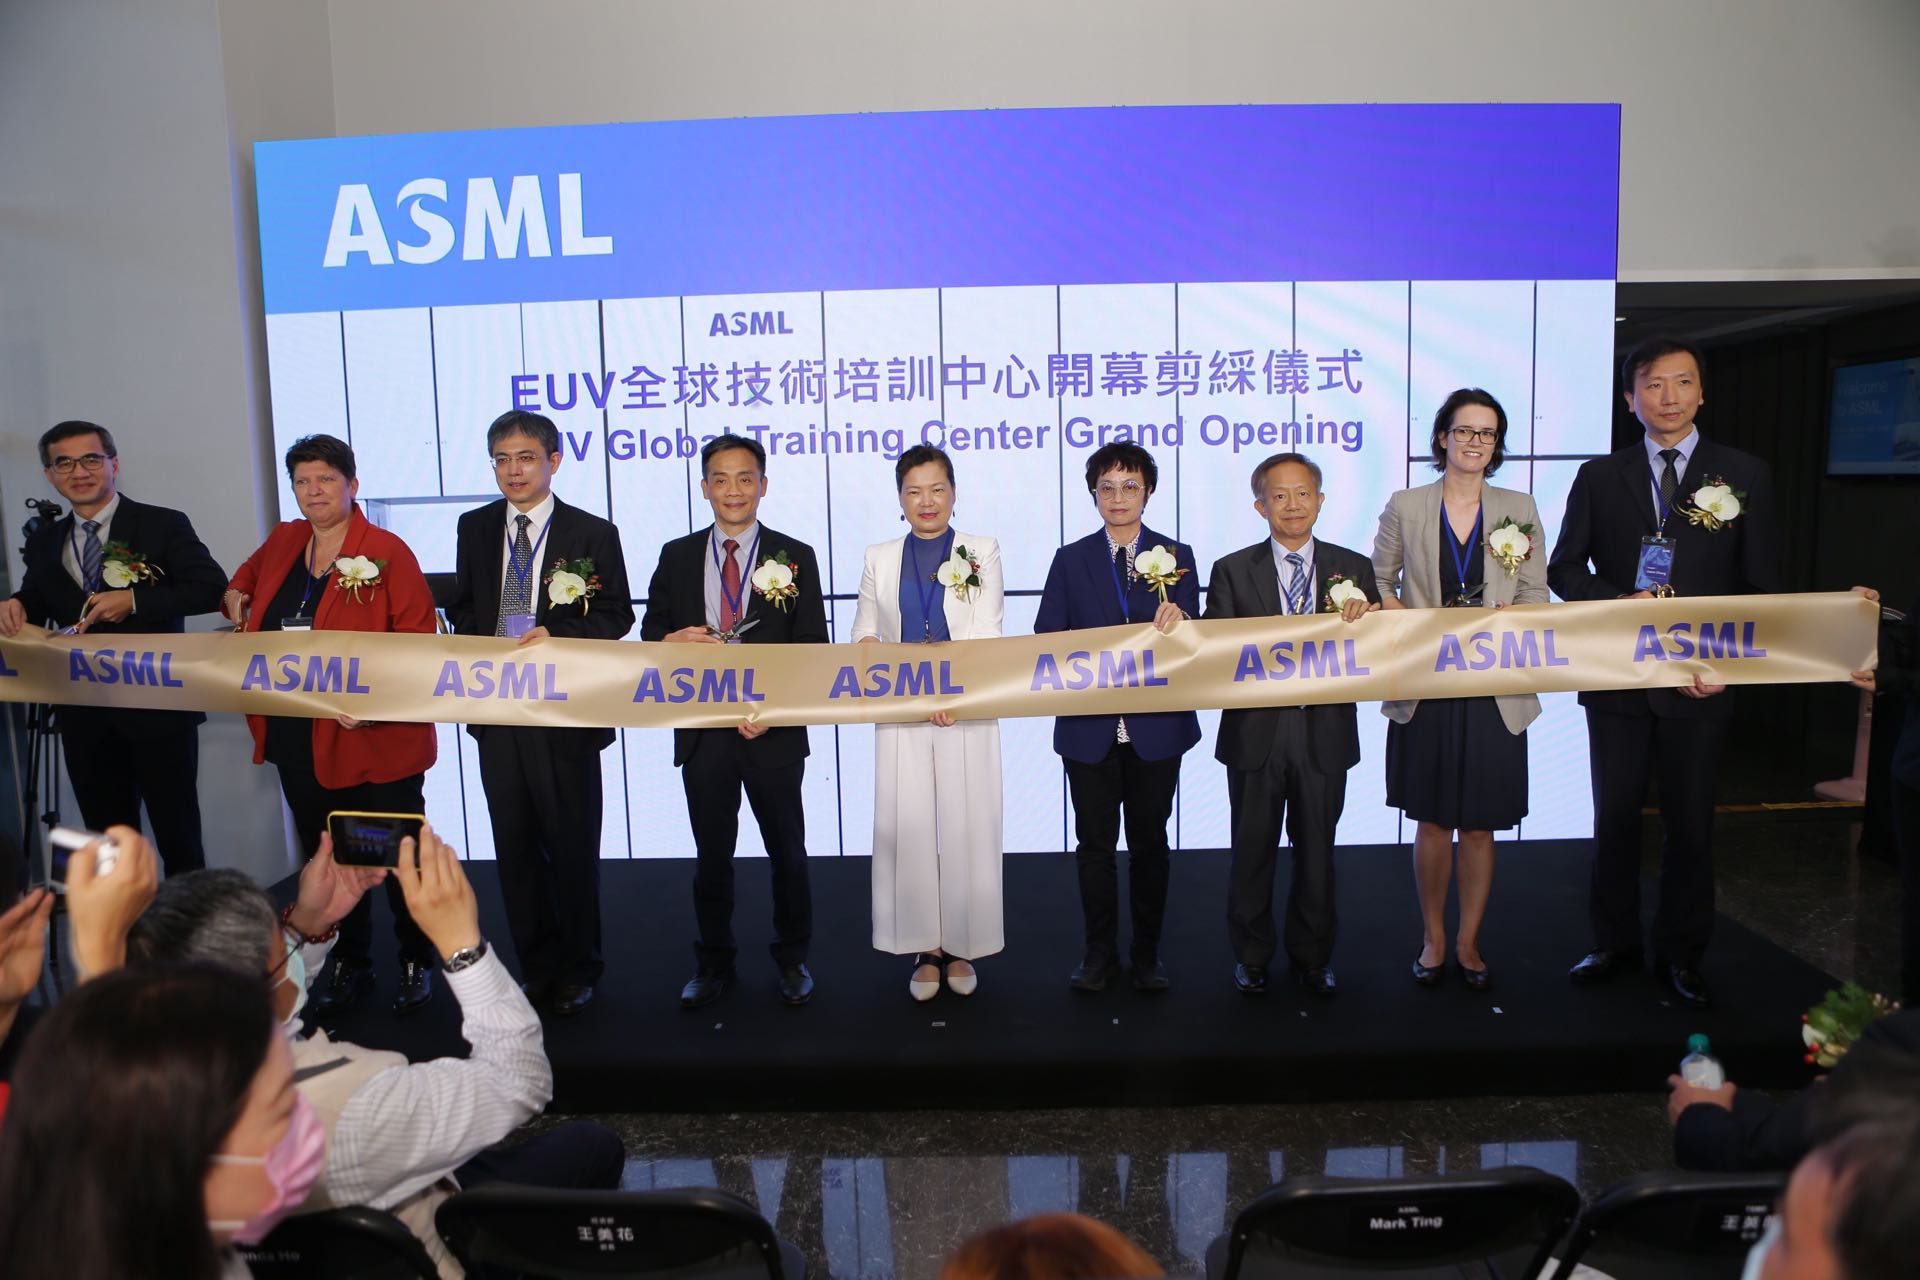 The opening ceremony of ASML EUV global technology training center Photo-2